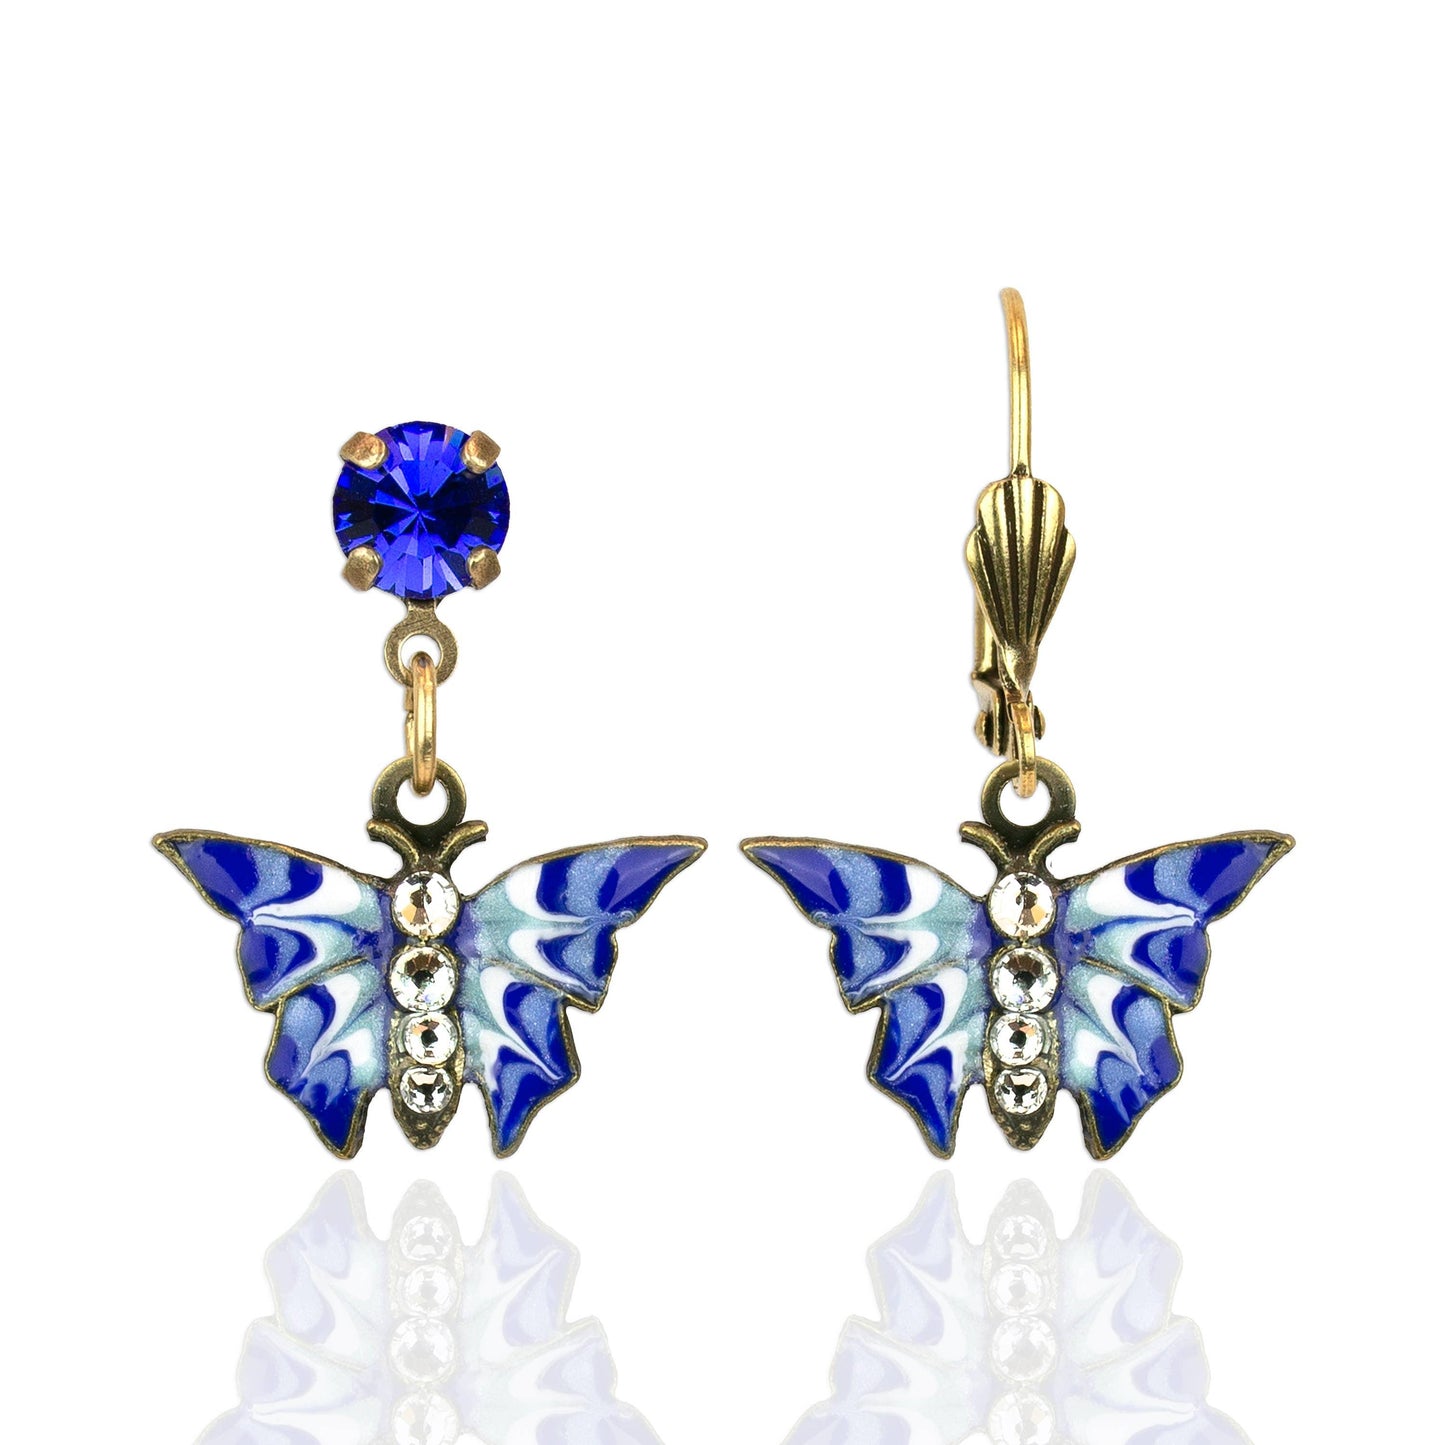 Blue and White Unique Enamel Crystal Butterfly Earrings: Leverback - Sugar River Shoppe